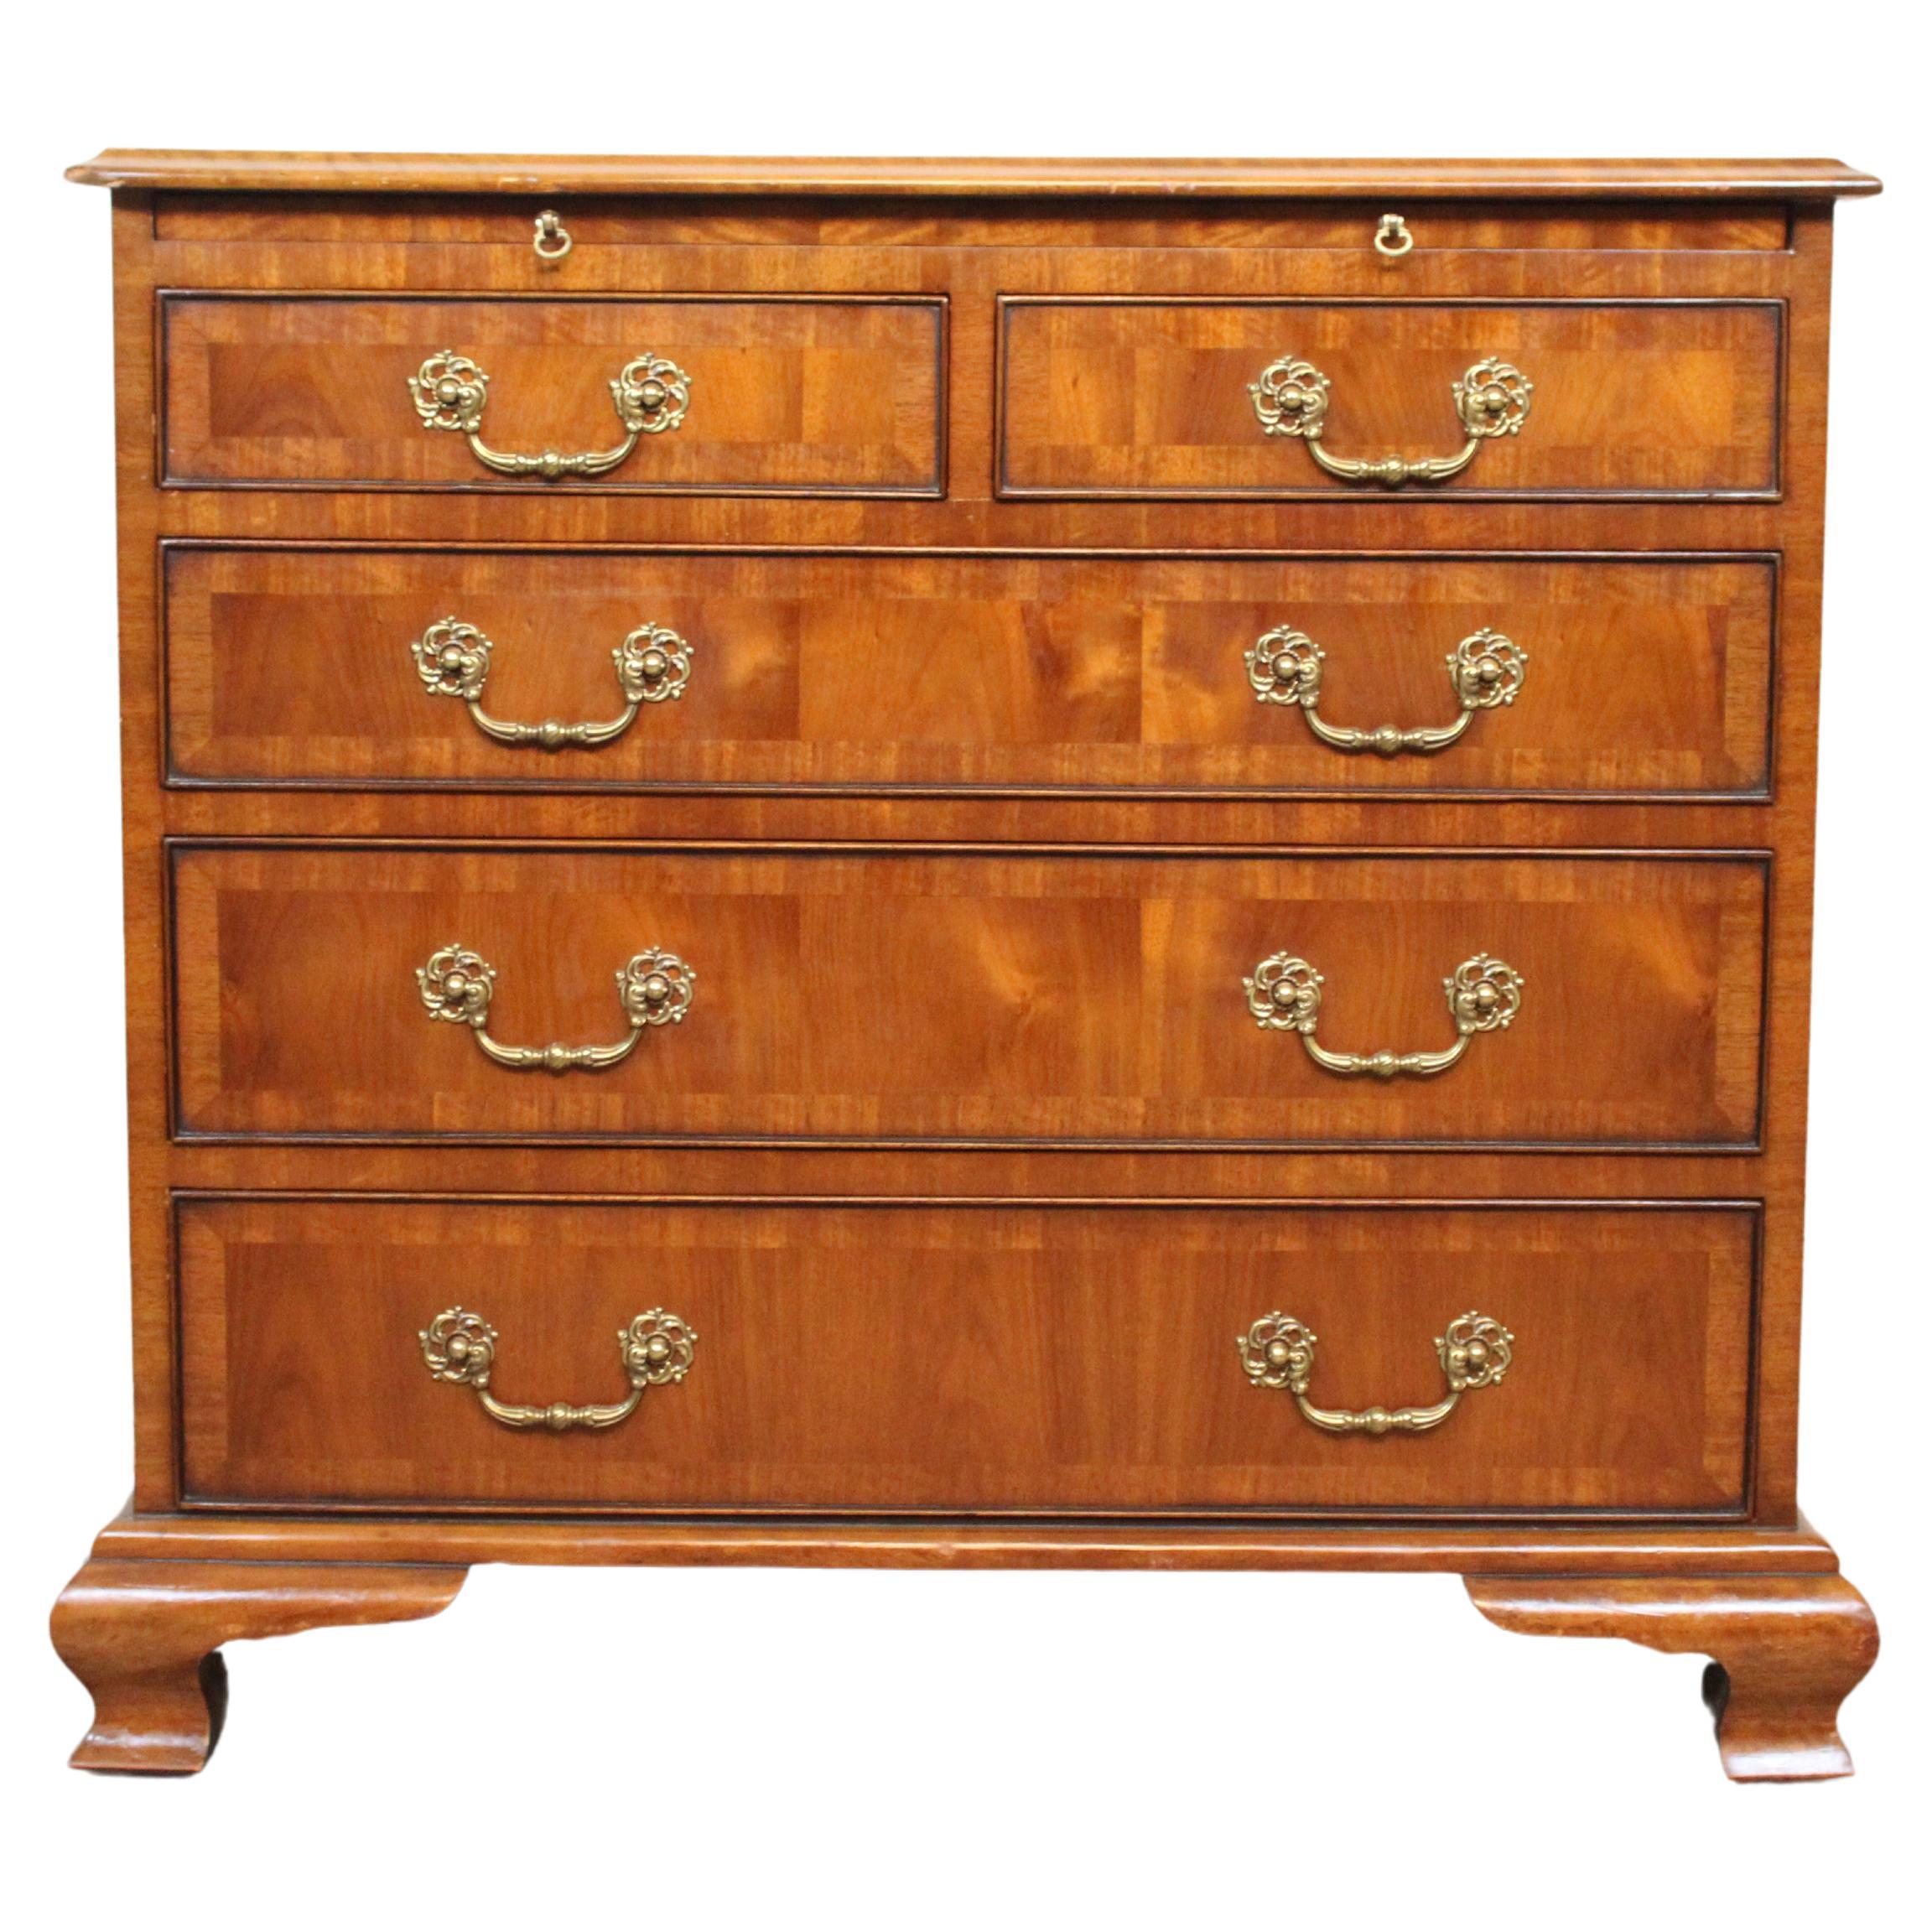 Vintage Louis XIV Revival Chest of Drawers by Maitland Smith